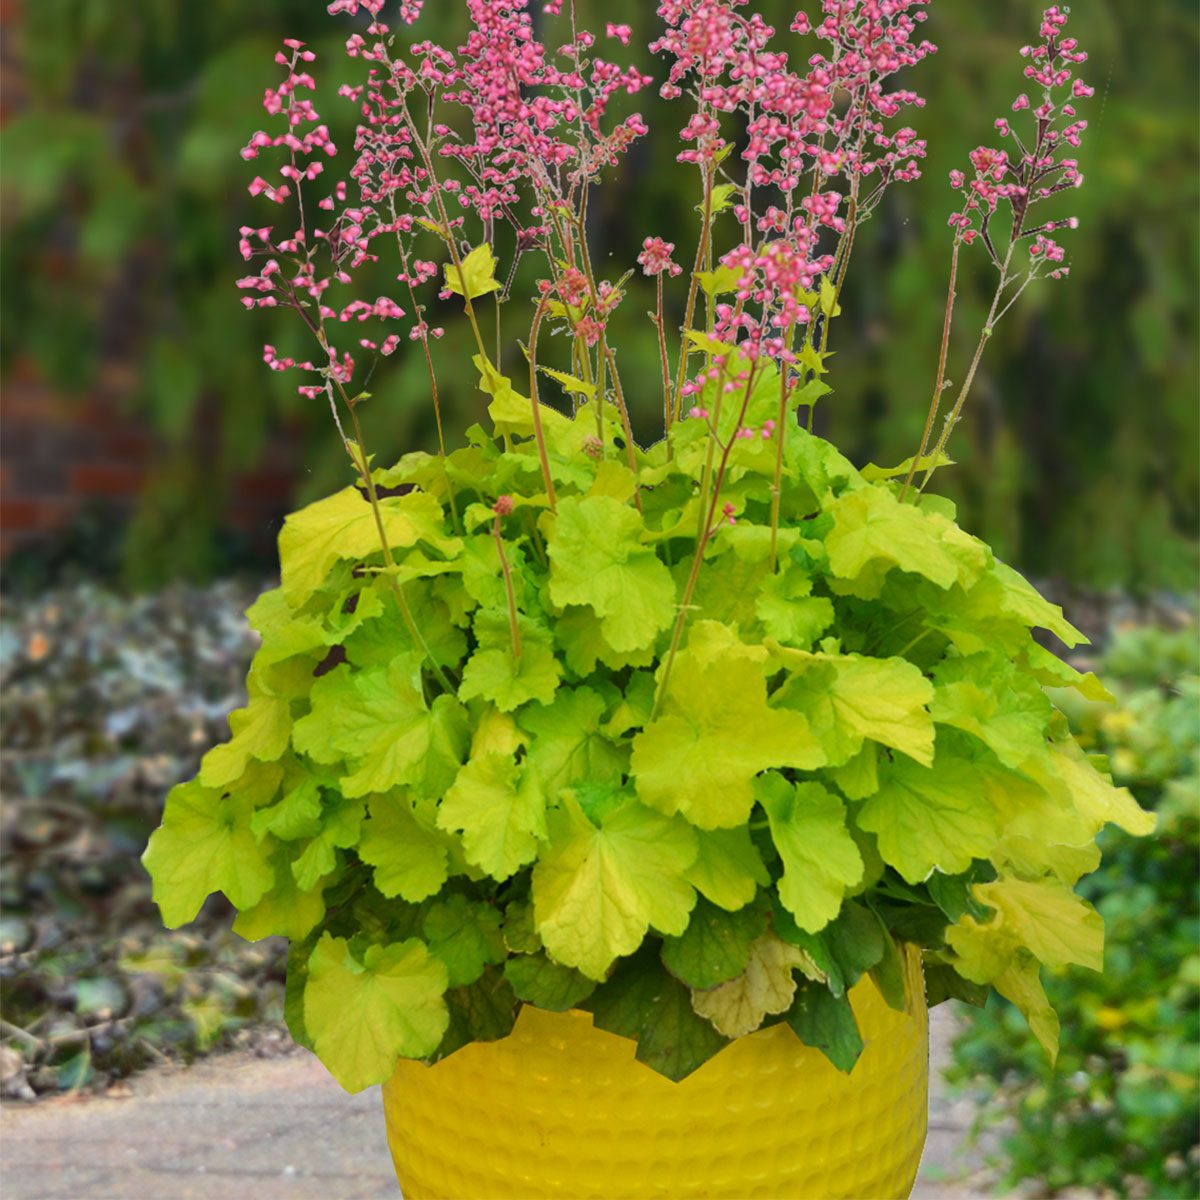 11 Best Plants For Container Gardening The Family Handyman,White Russian Drink